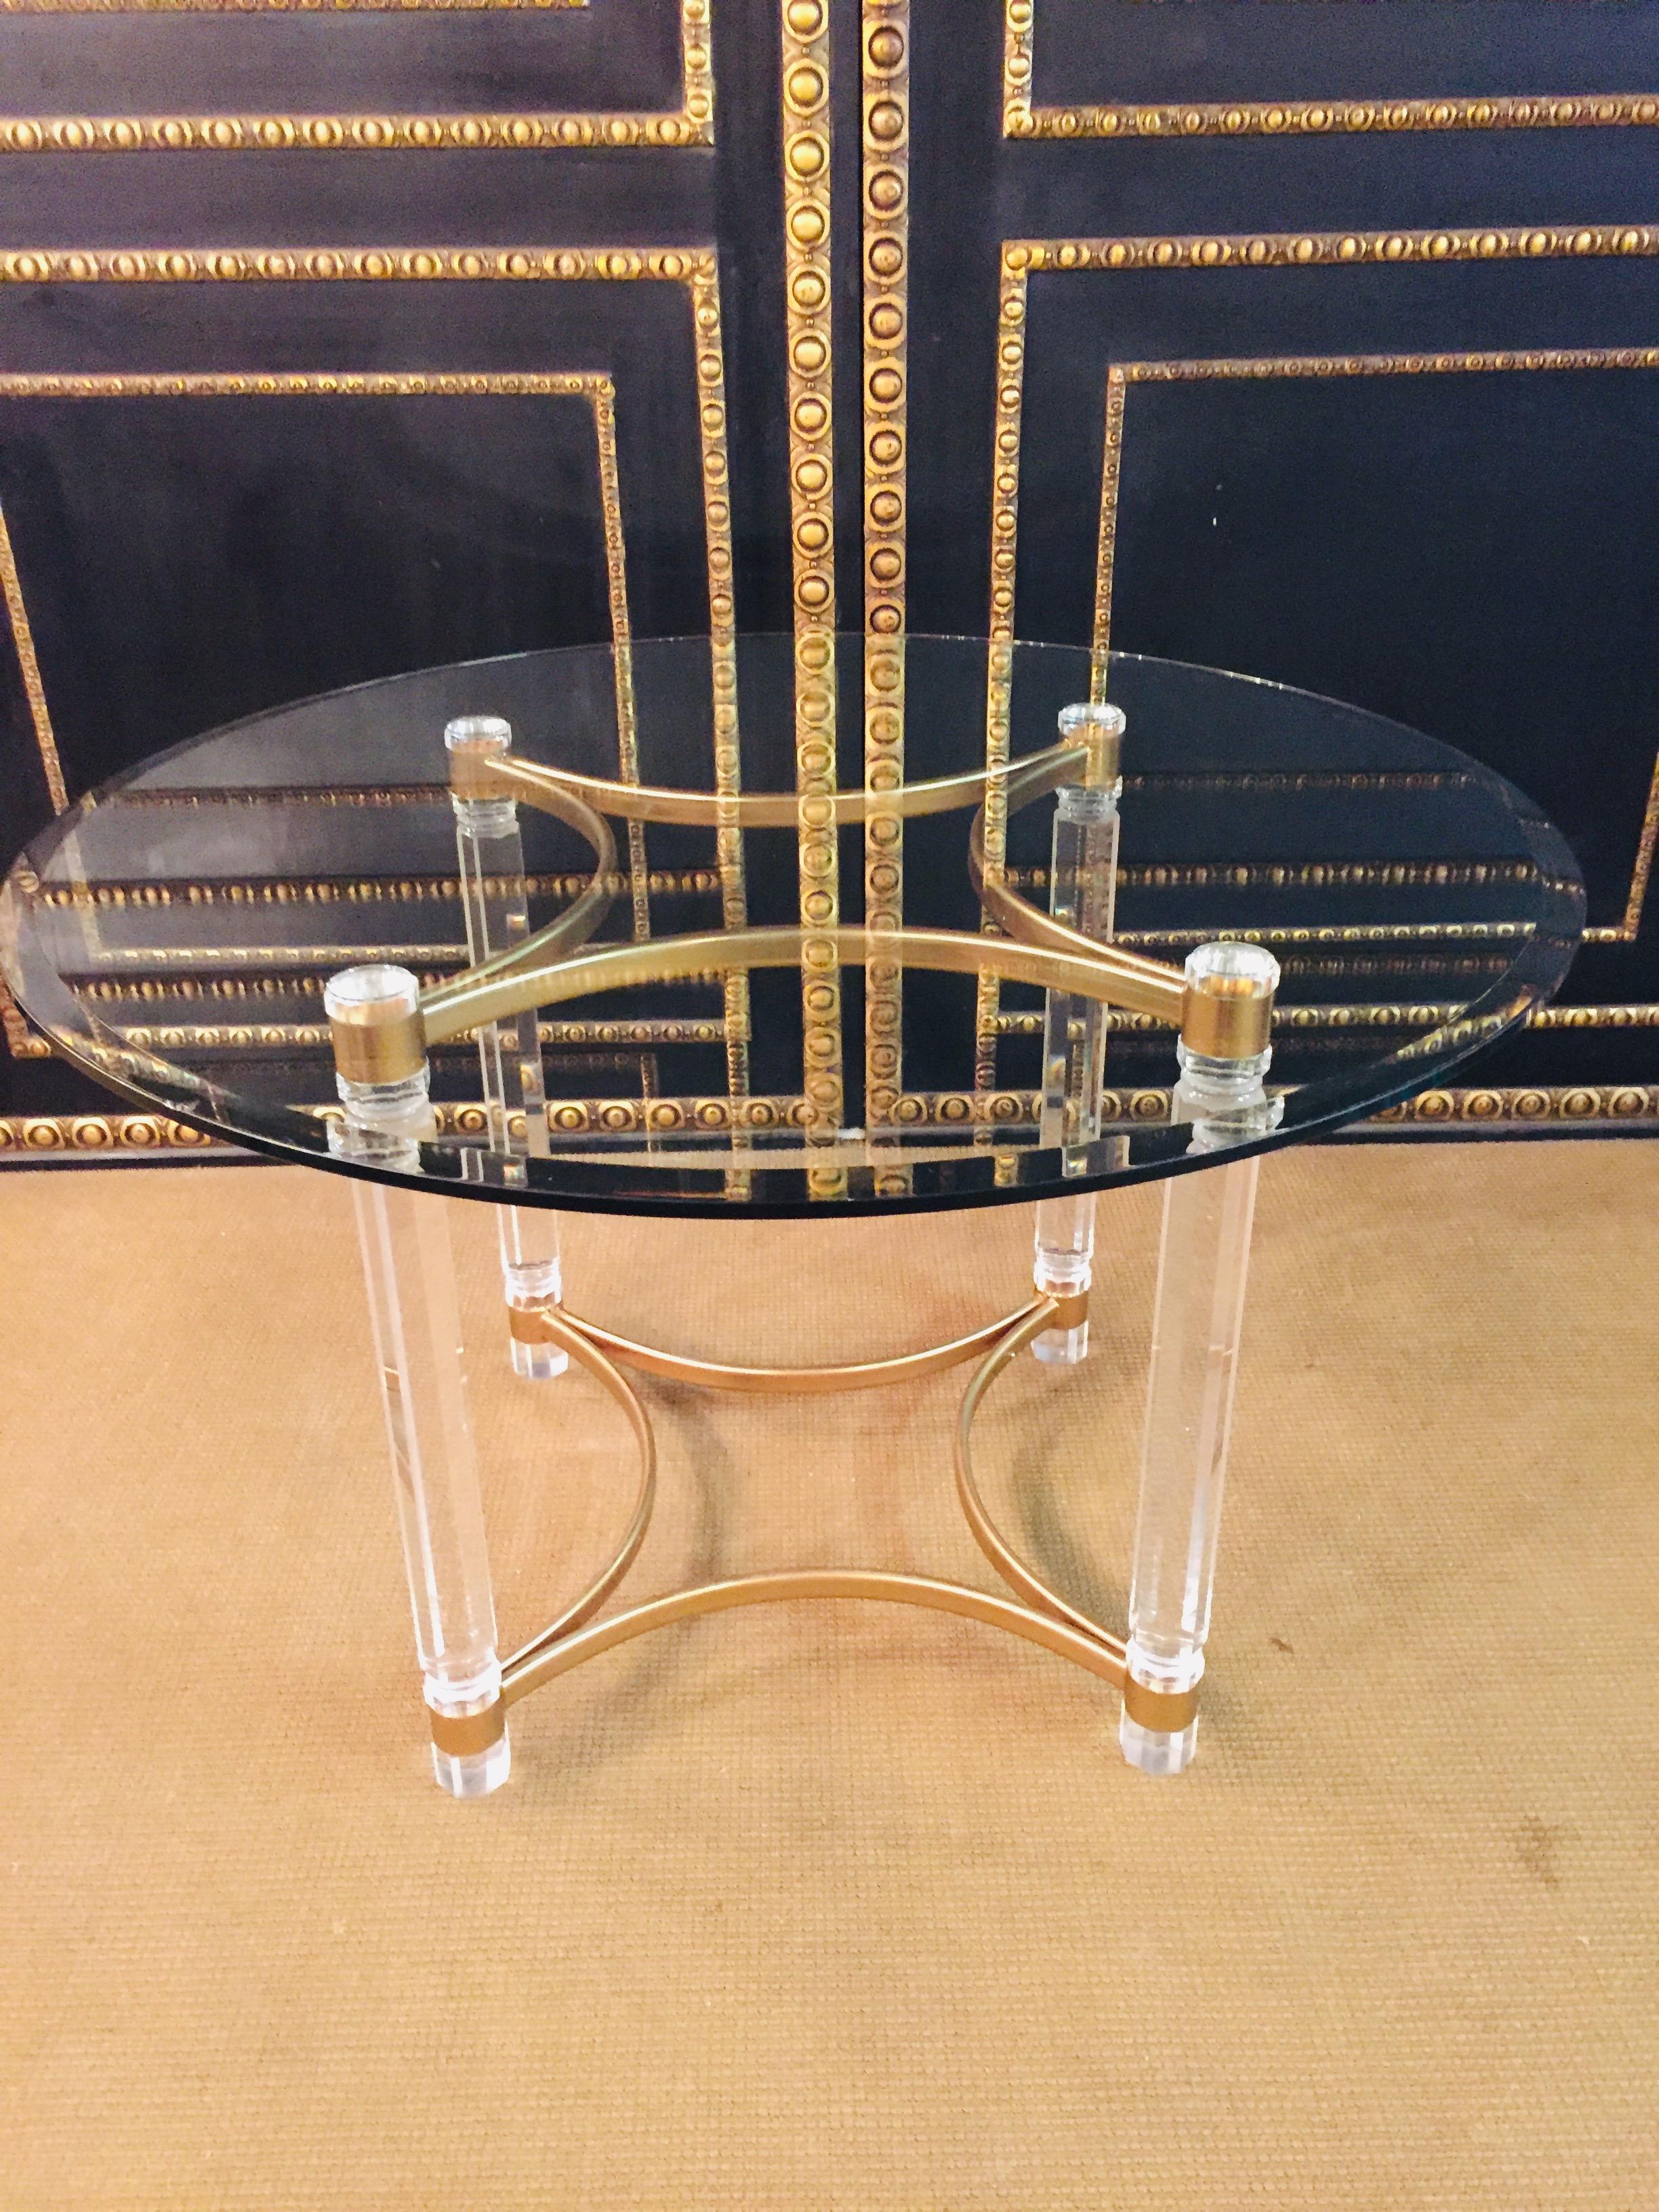 Glazed Acrylic Dining Table with Four Collumns Legs and Round Glass Plate